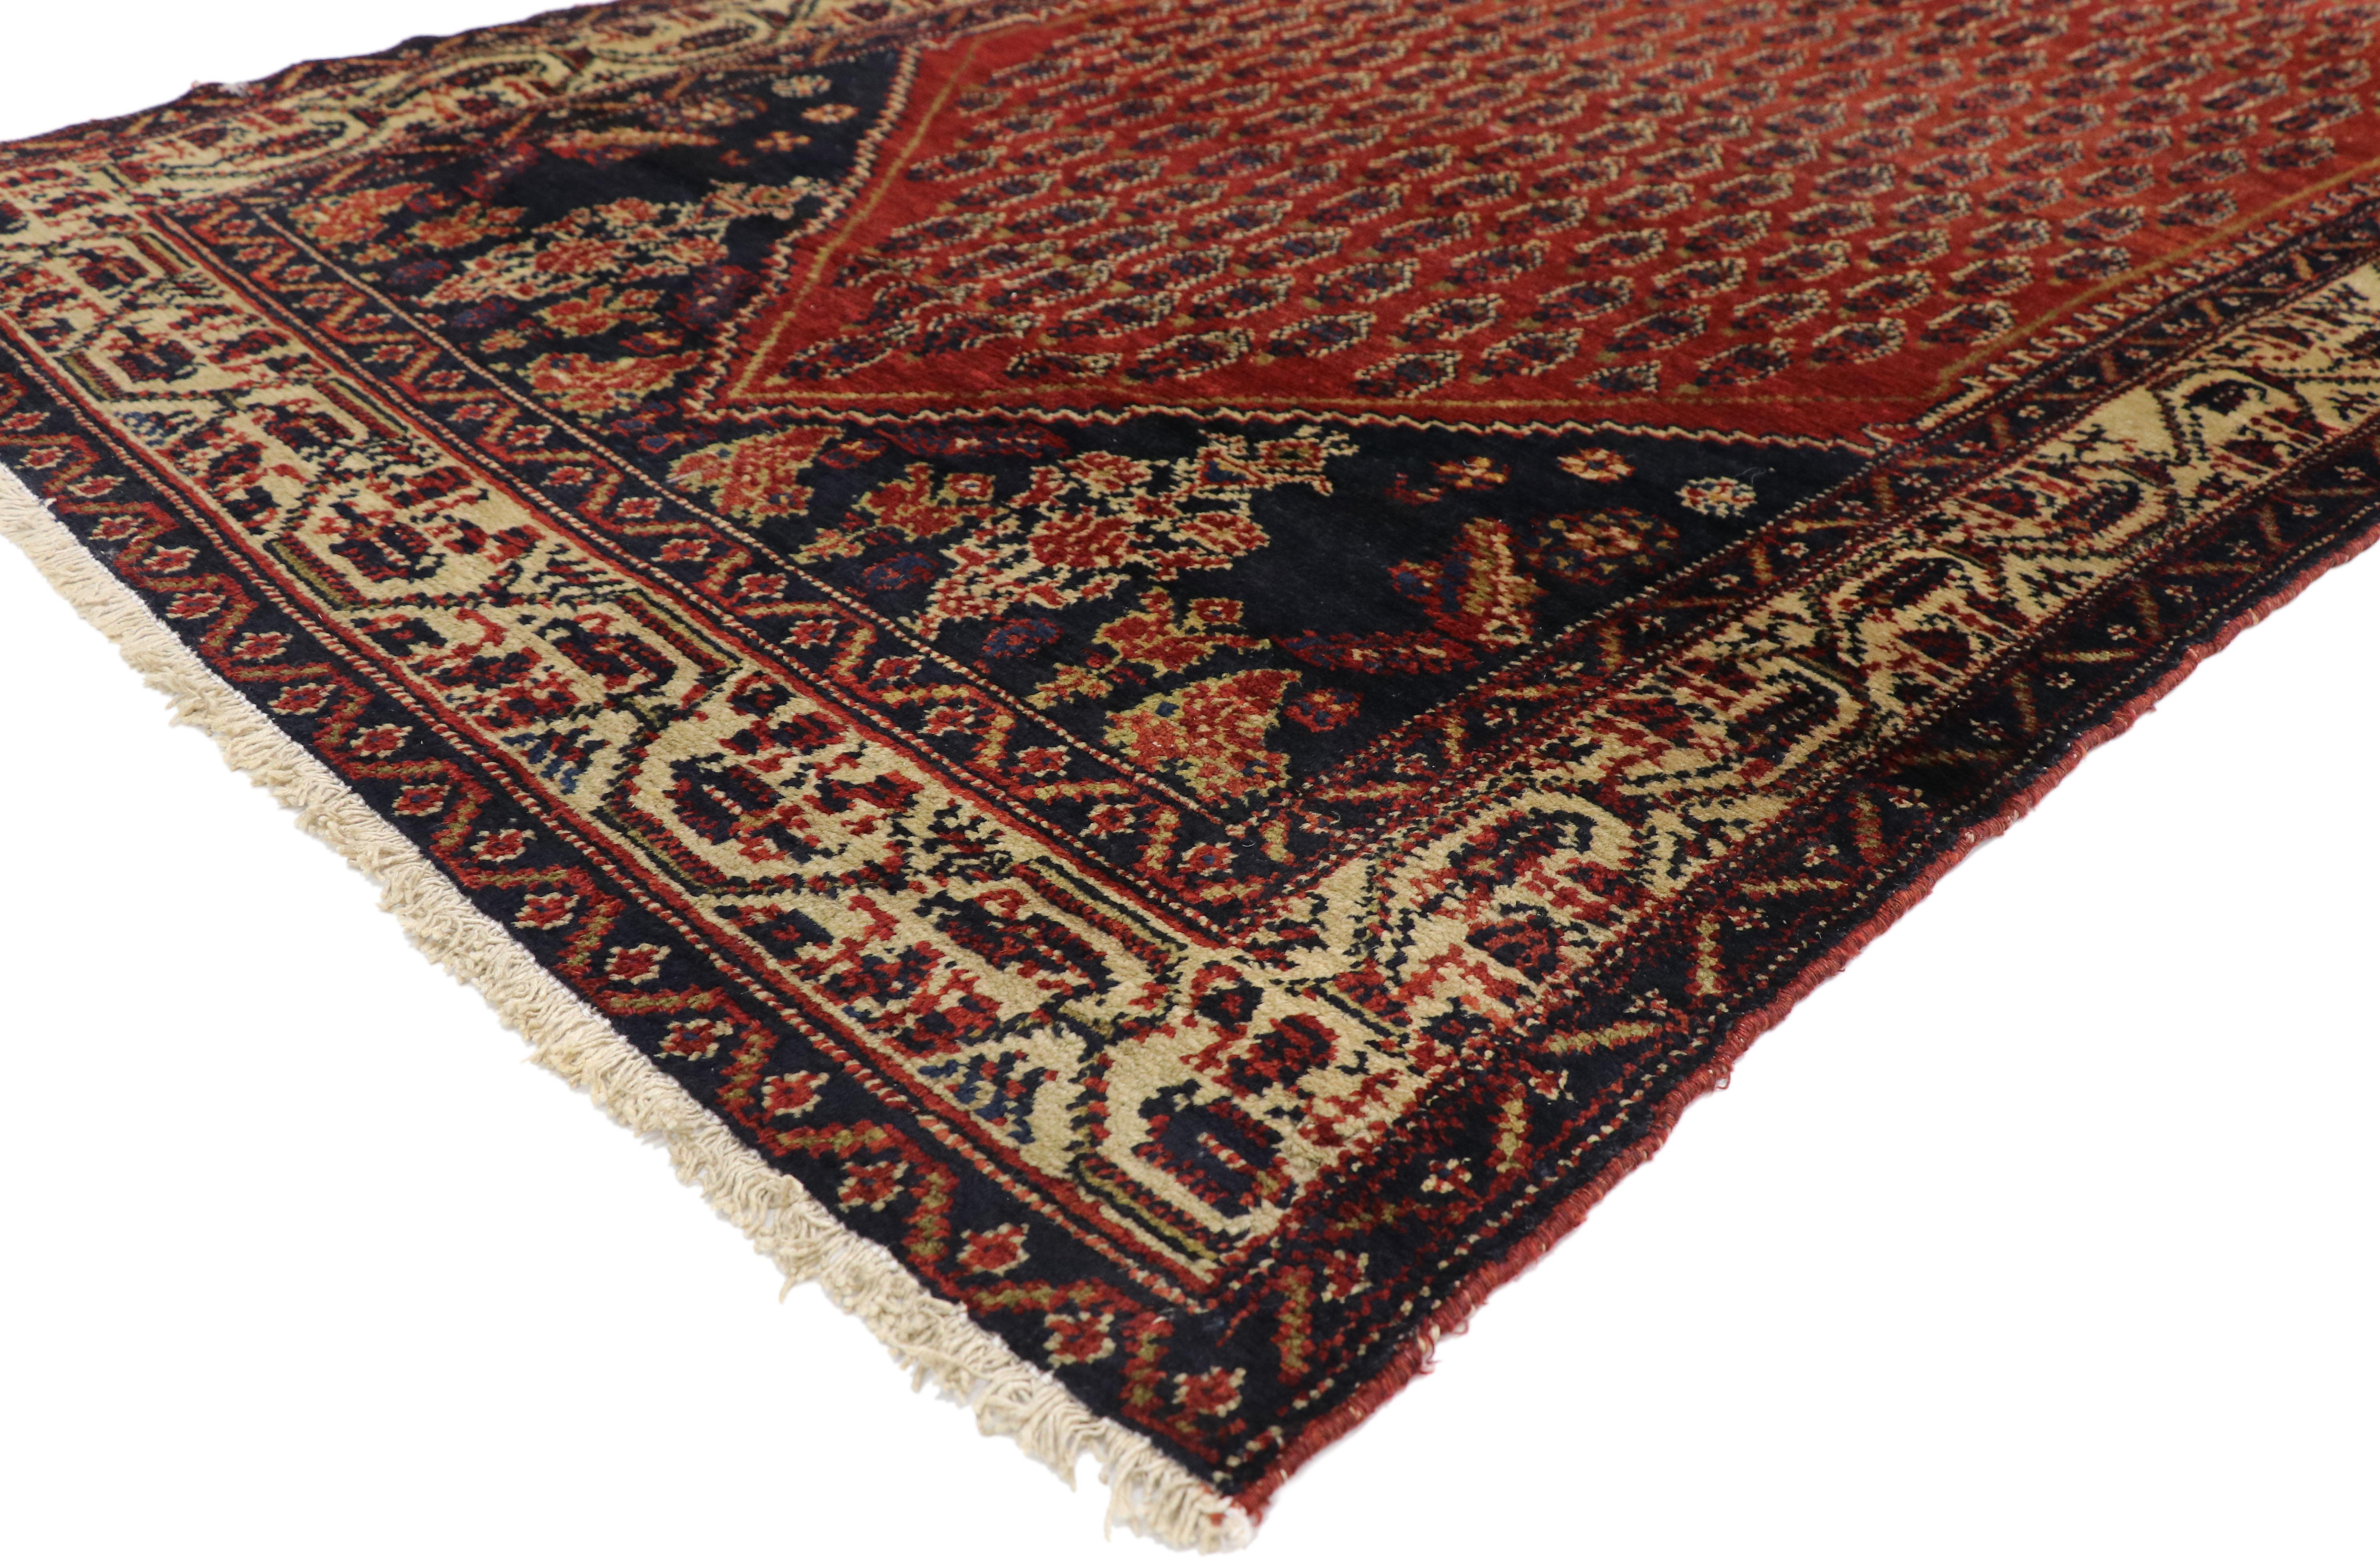 72241, antique Persian Malayer runner Victorian Manor House style. This hand knotted wool antique Persian Malayer runner features an all-over boteh pattern spread across an abrashed red field. The widely used boteh motif is thought to symbolize life